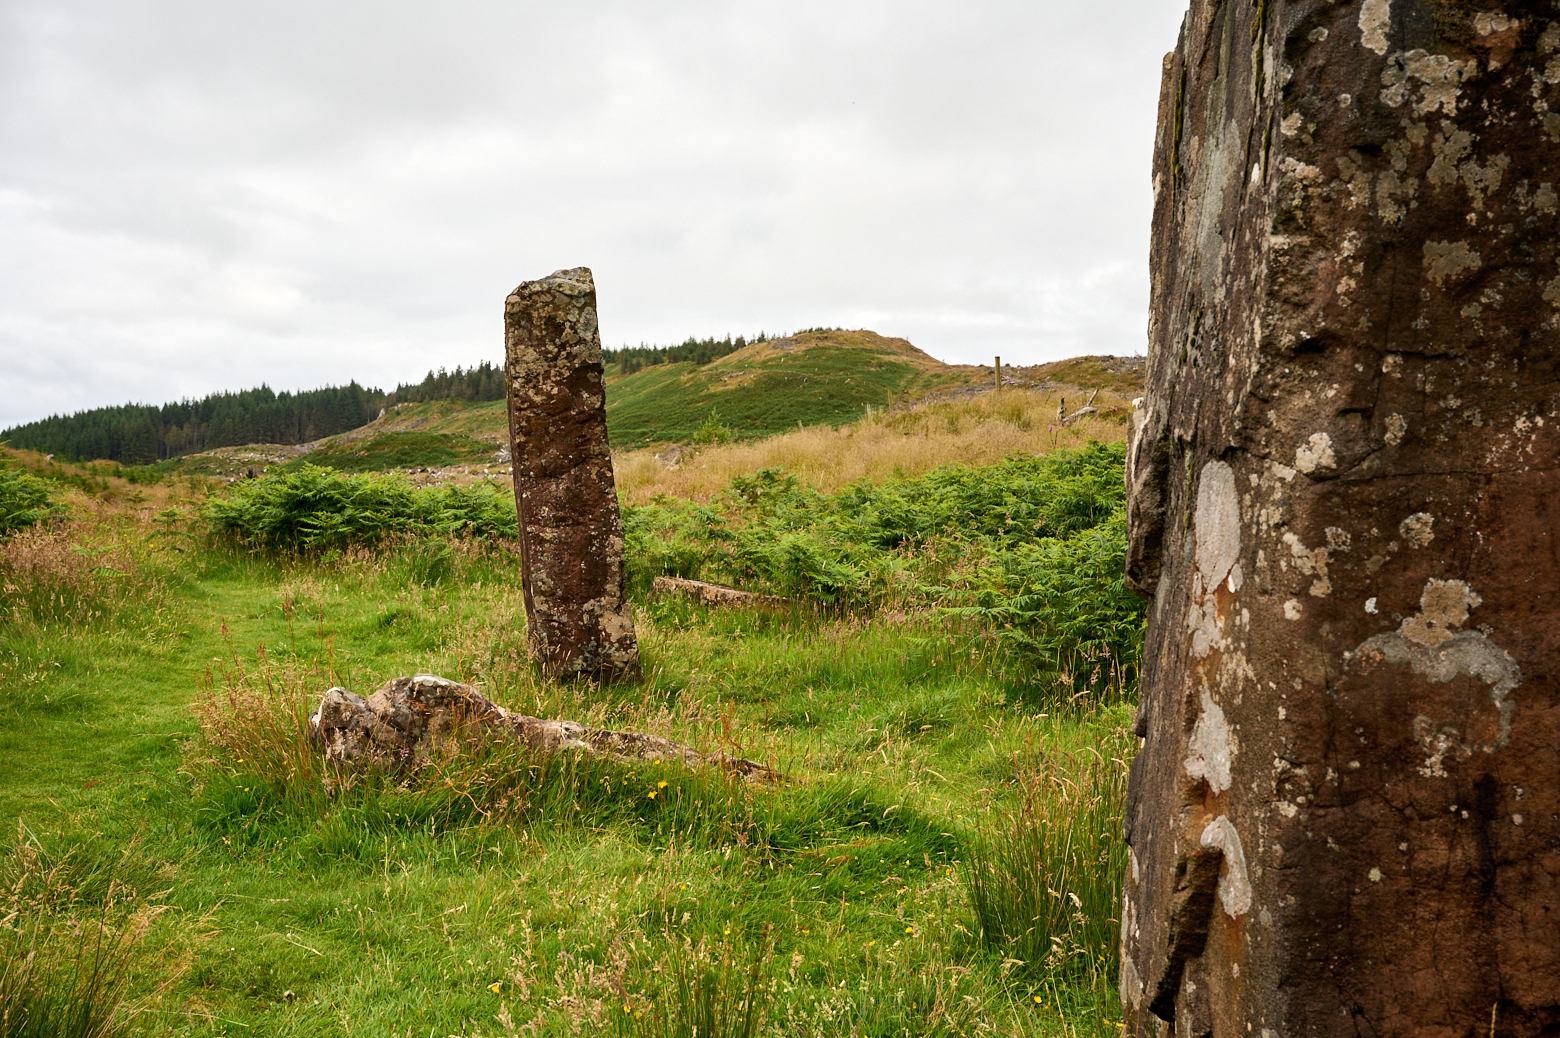 The Baliscate Standing Stones near Tobermory on the Isle of Mull.